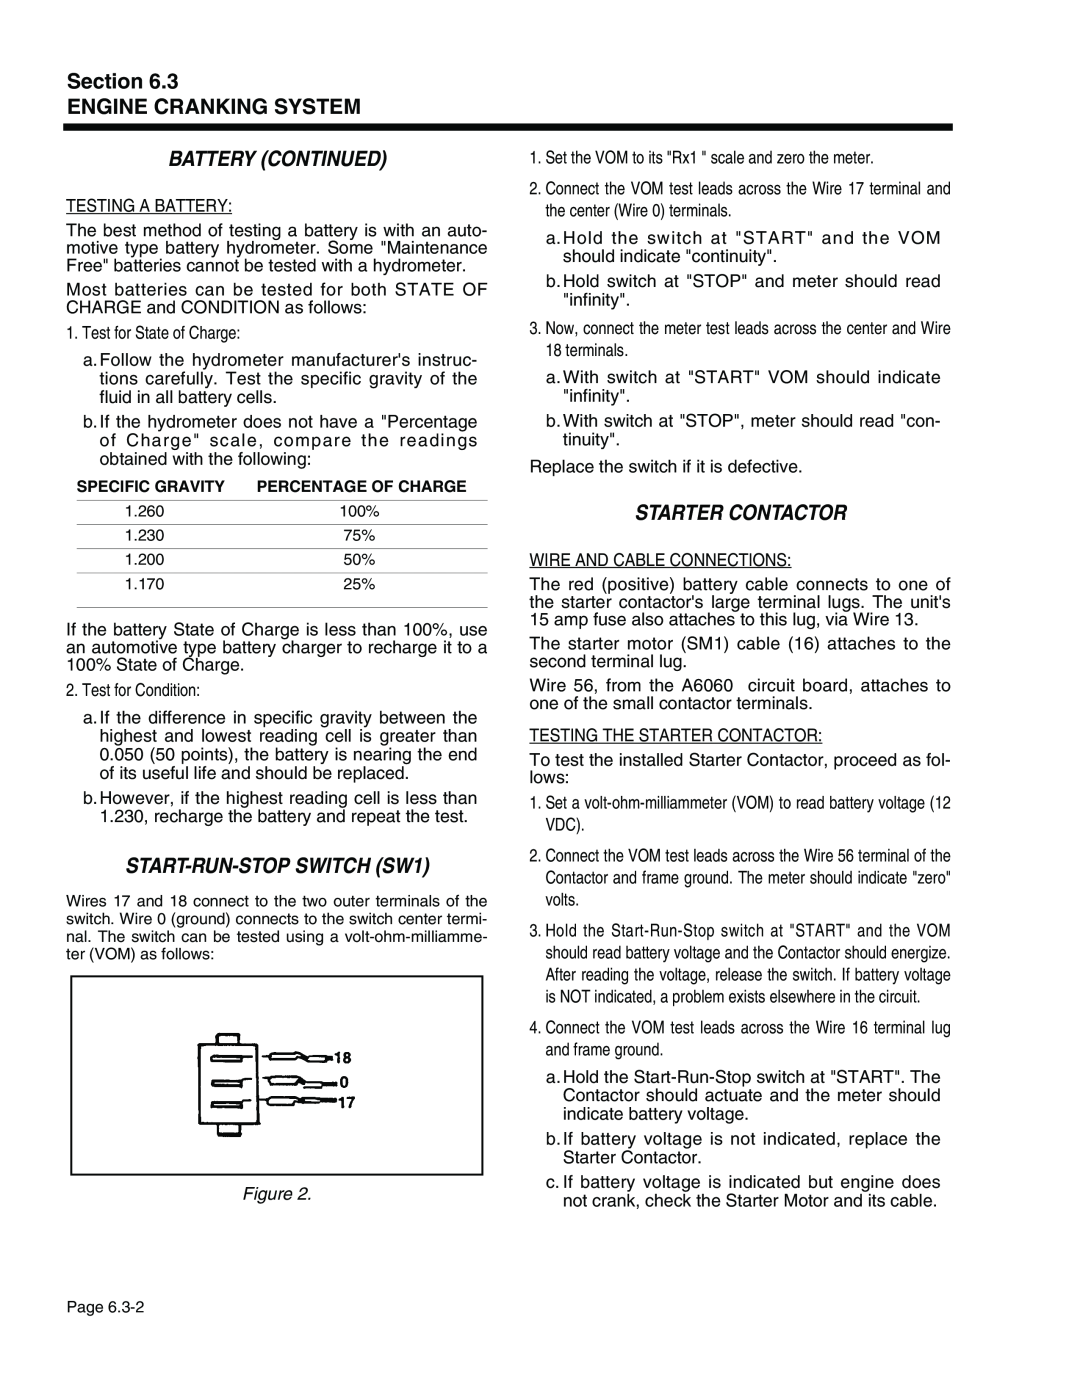 Generac Power Systems 940-2, 941-2 service manual Battery Continued, START-RUN-STOP SWITCH SW1, Starter Contactor 